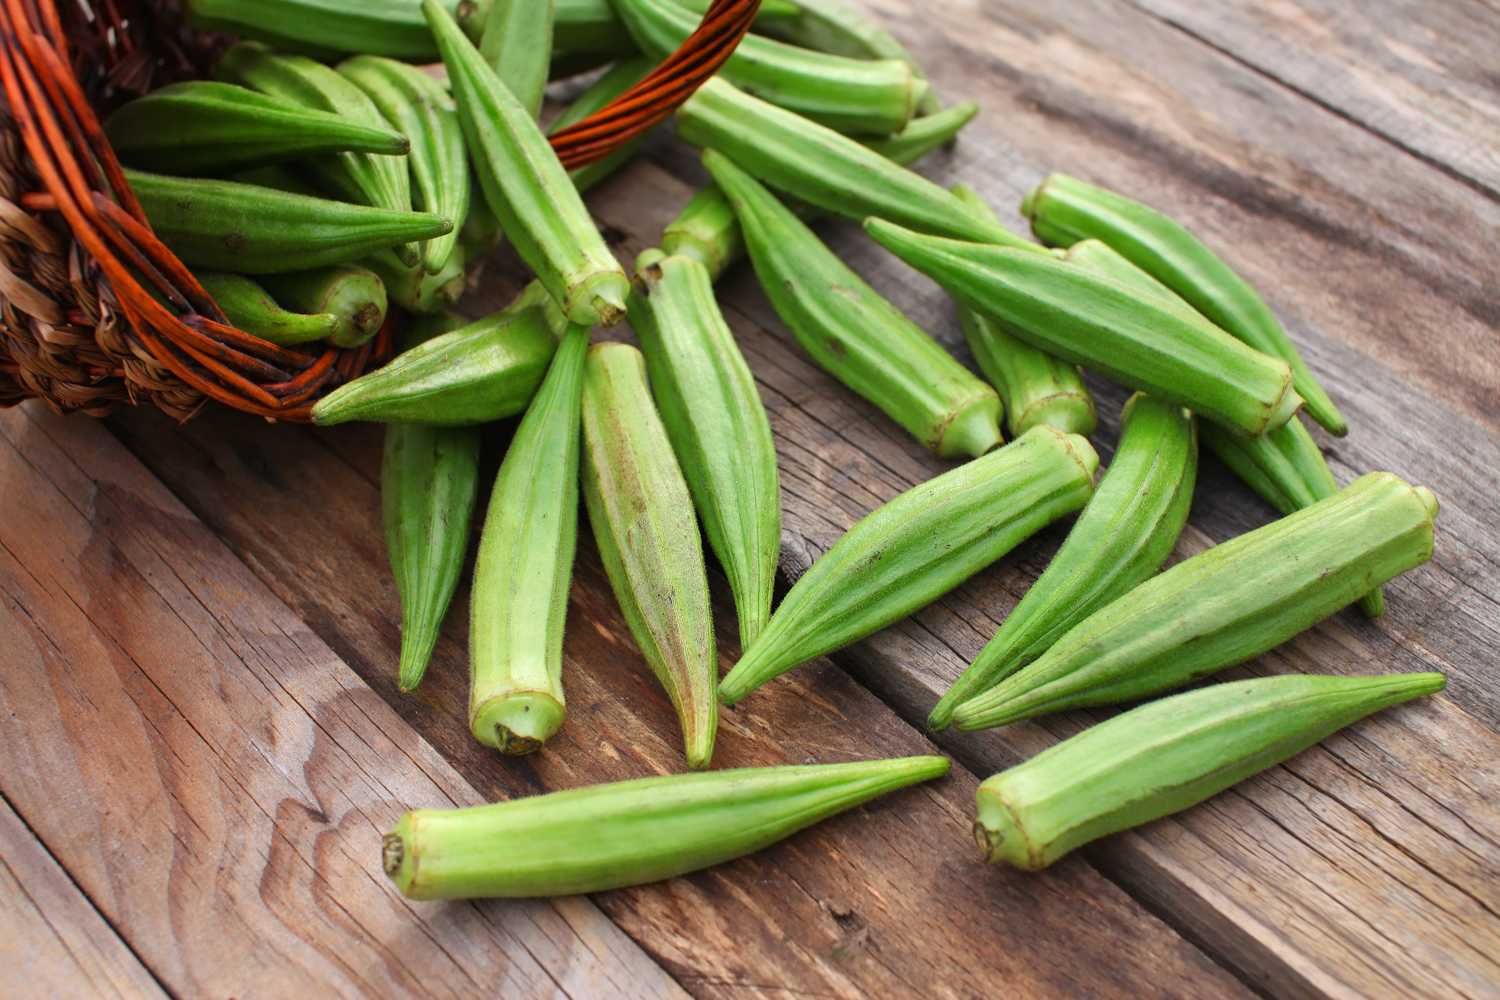 microsoft, what are the potassium and phosphorus contents of okra? a review by nutrition professionals